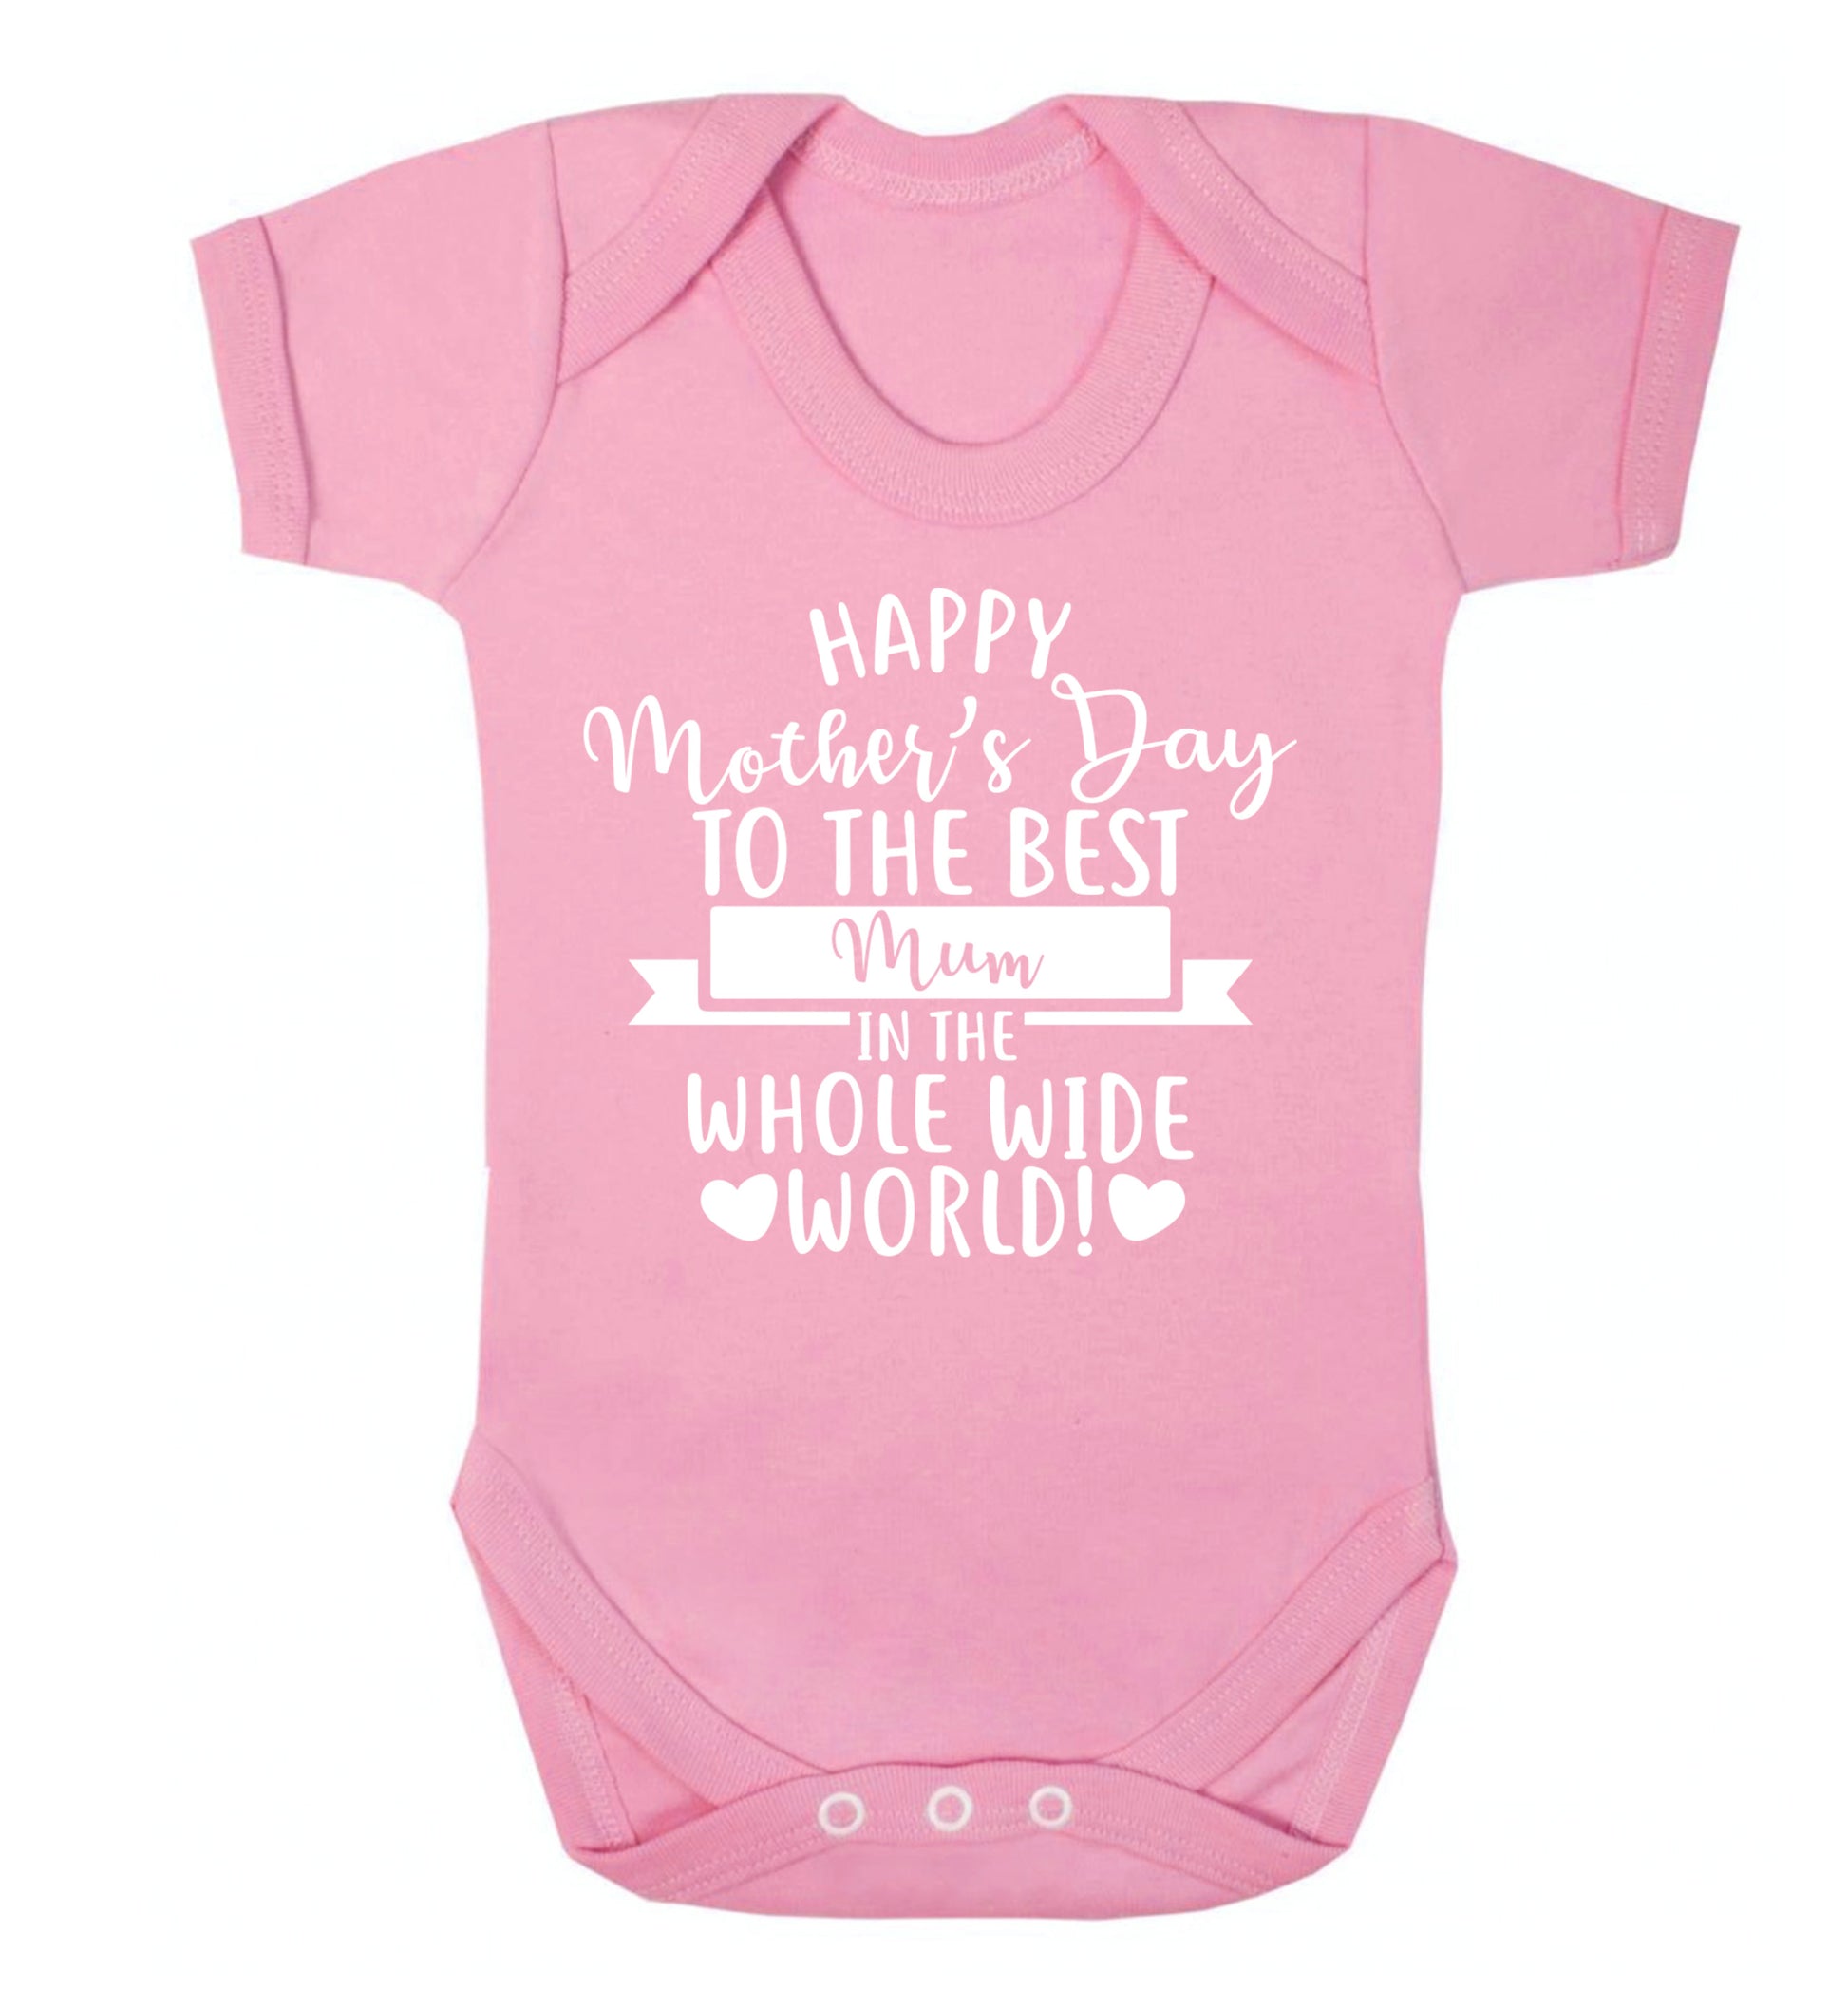 Happy Mother's Day to the best mum in the whole wide world! Baby Vest pale pink 18-24 months